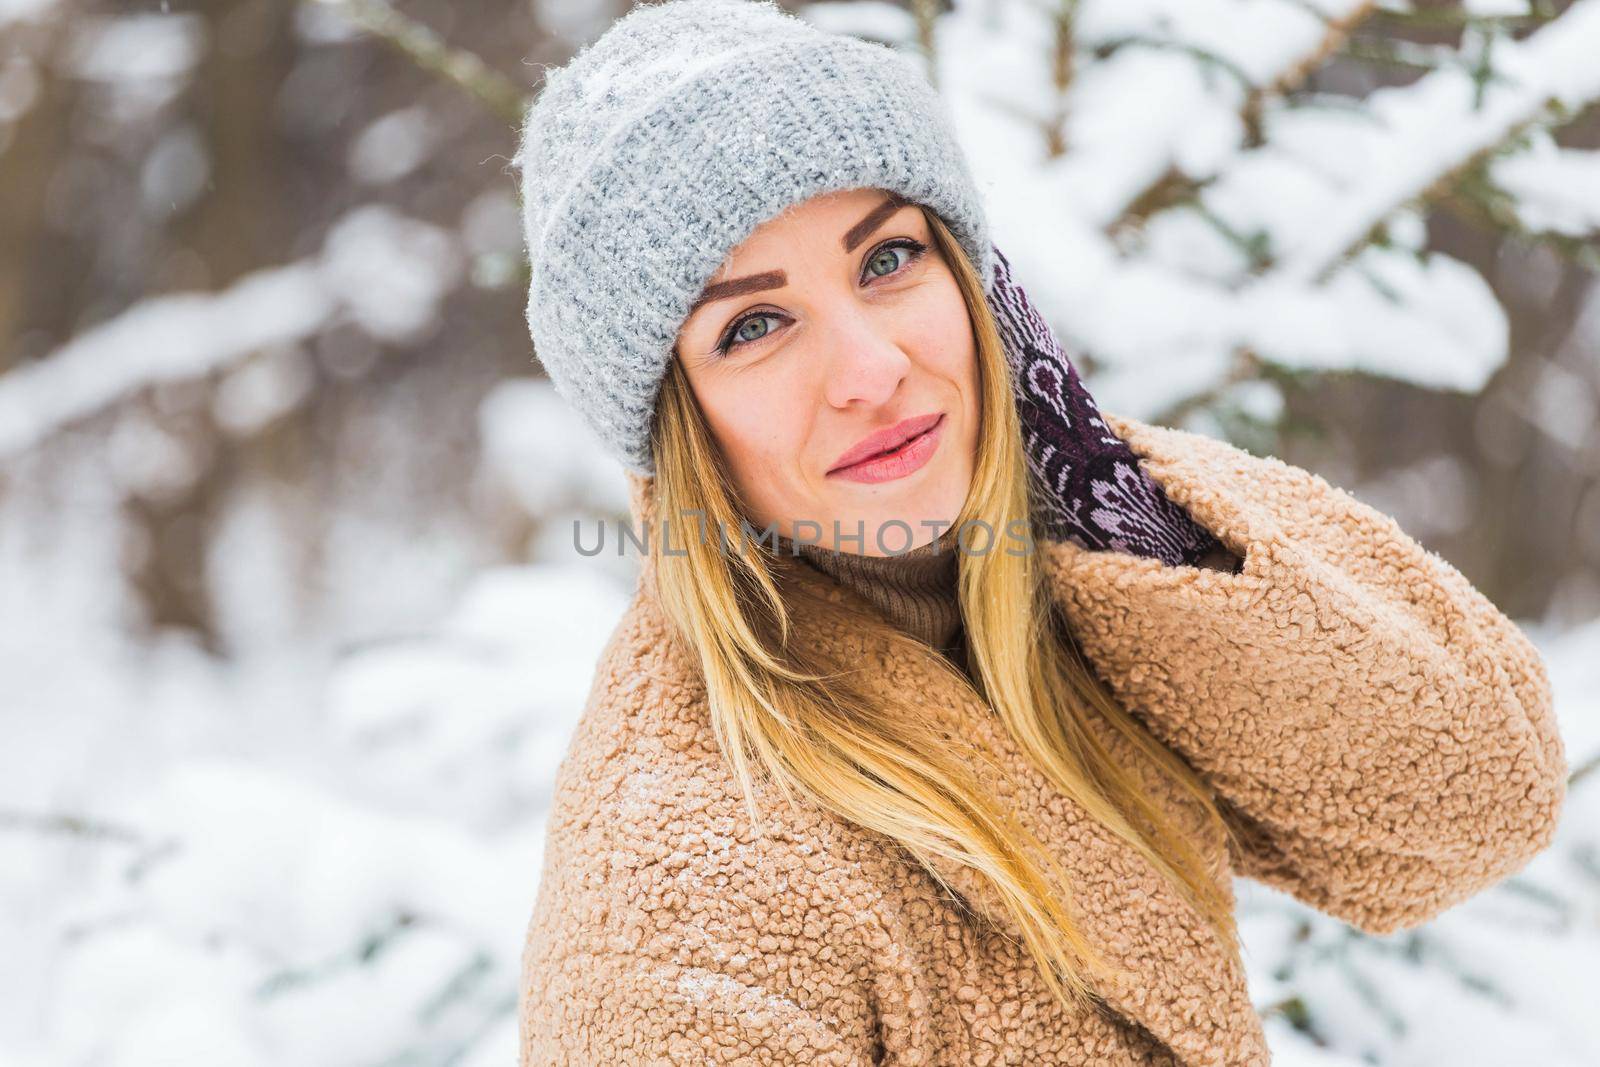 Beautiful winter portrait of young woman in the winter snowy scenery by Satura86